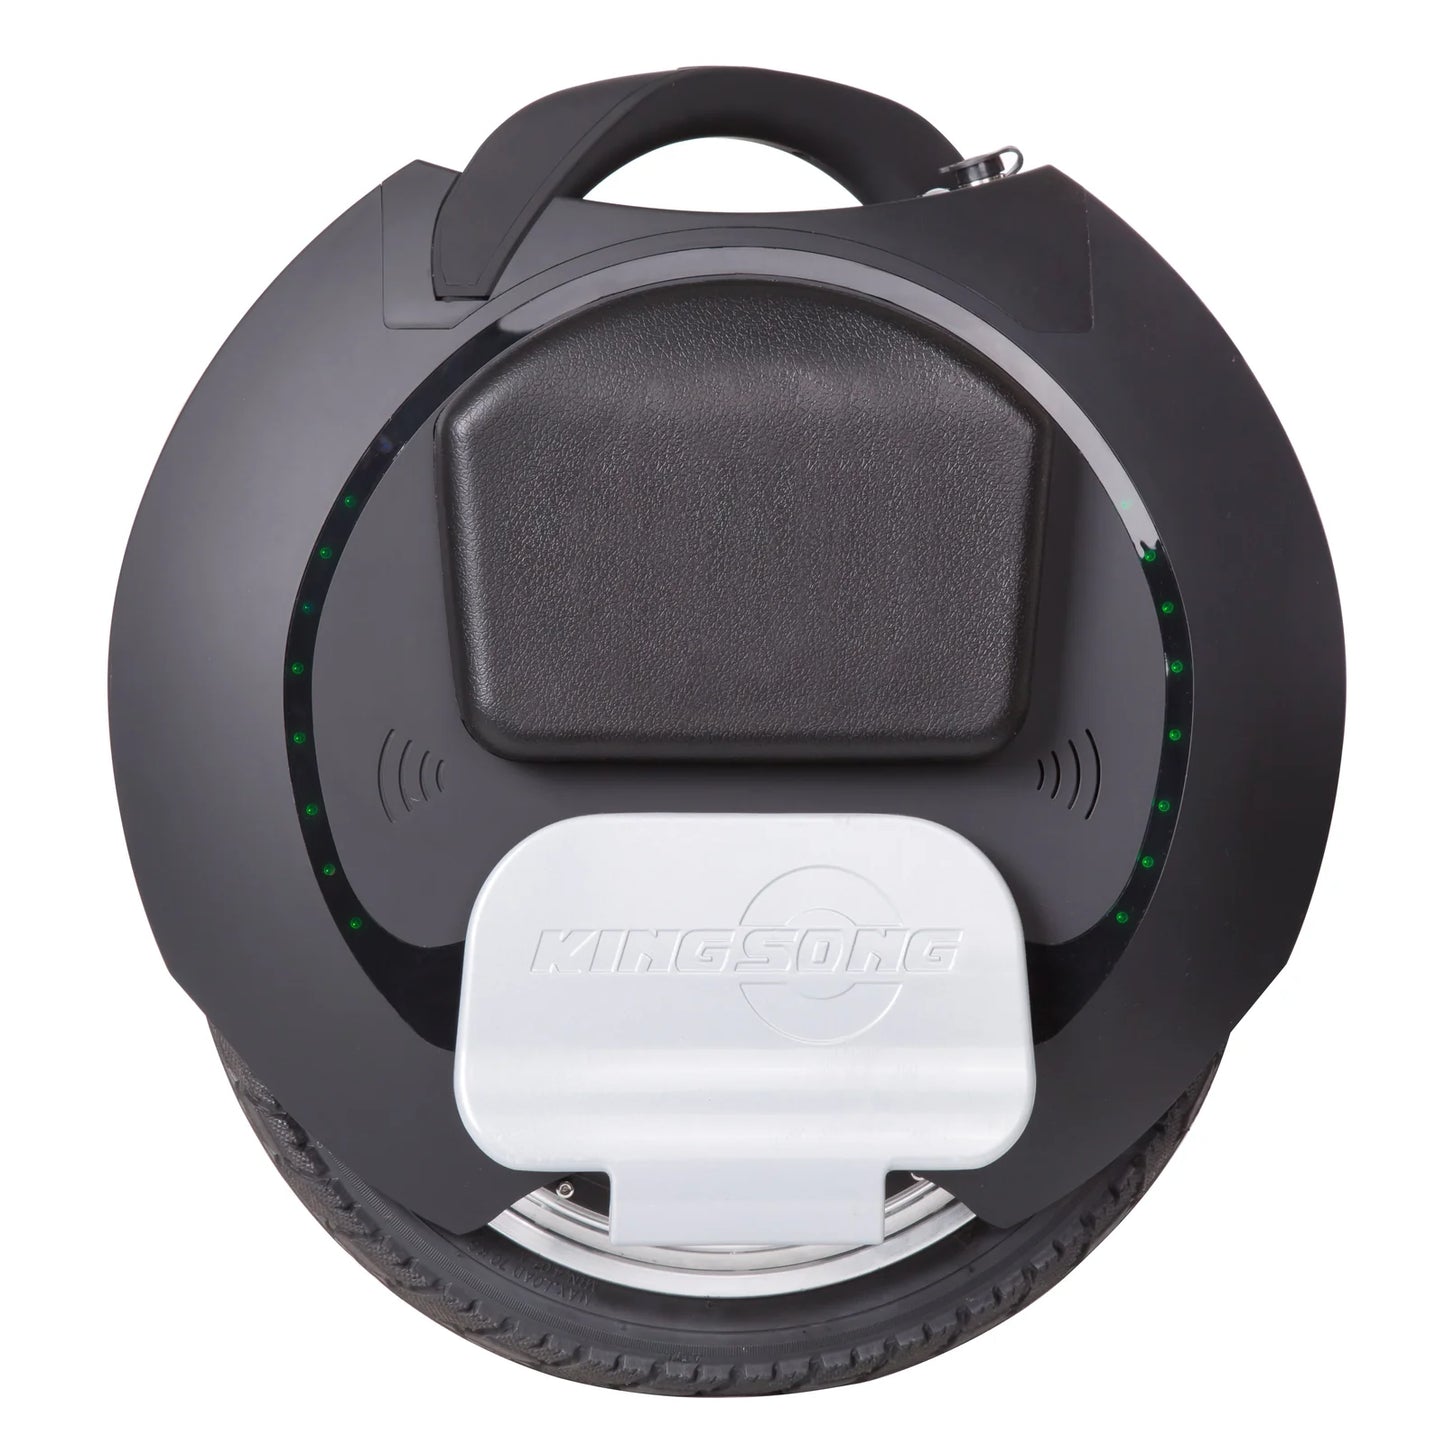 King Song KS-16S 16" Electric Unicycle